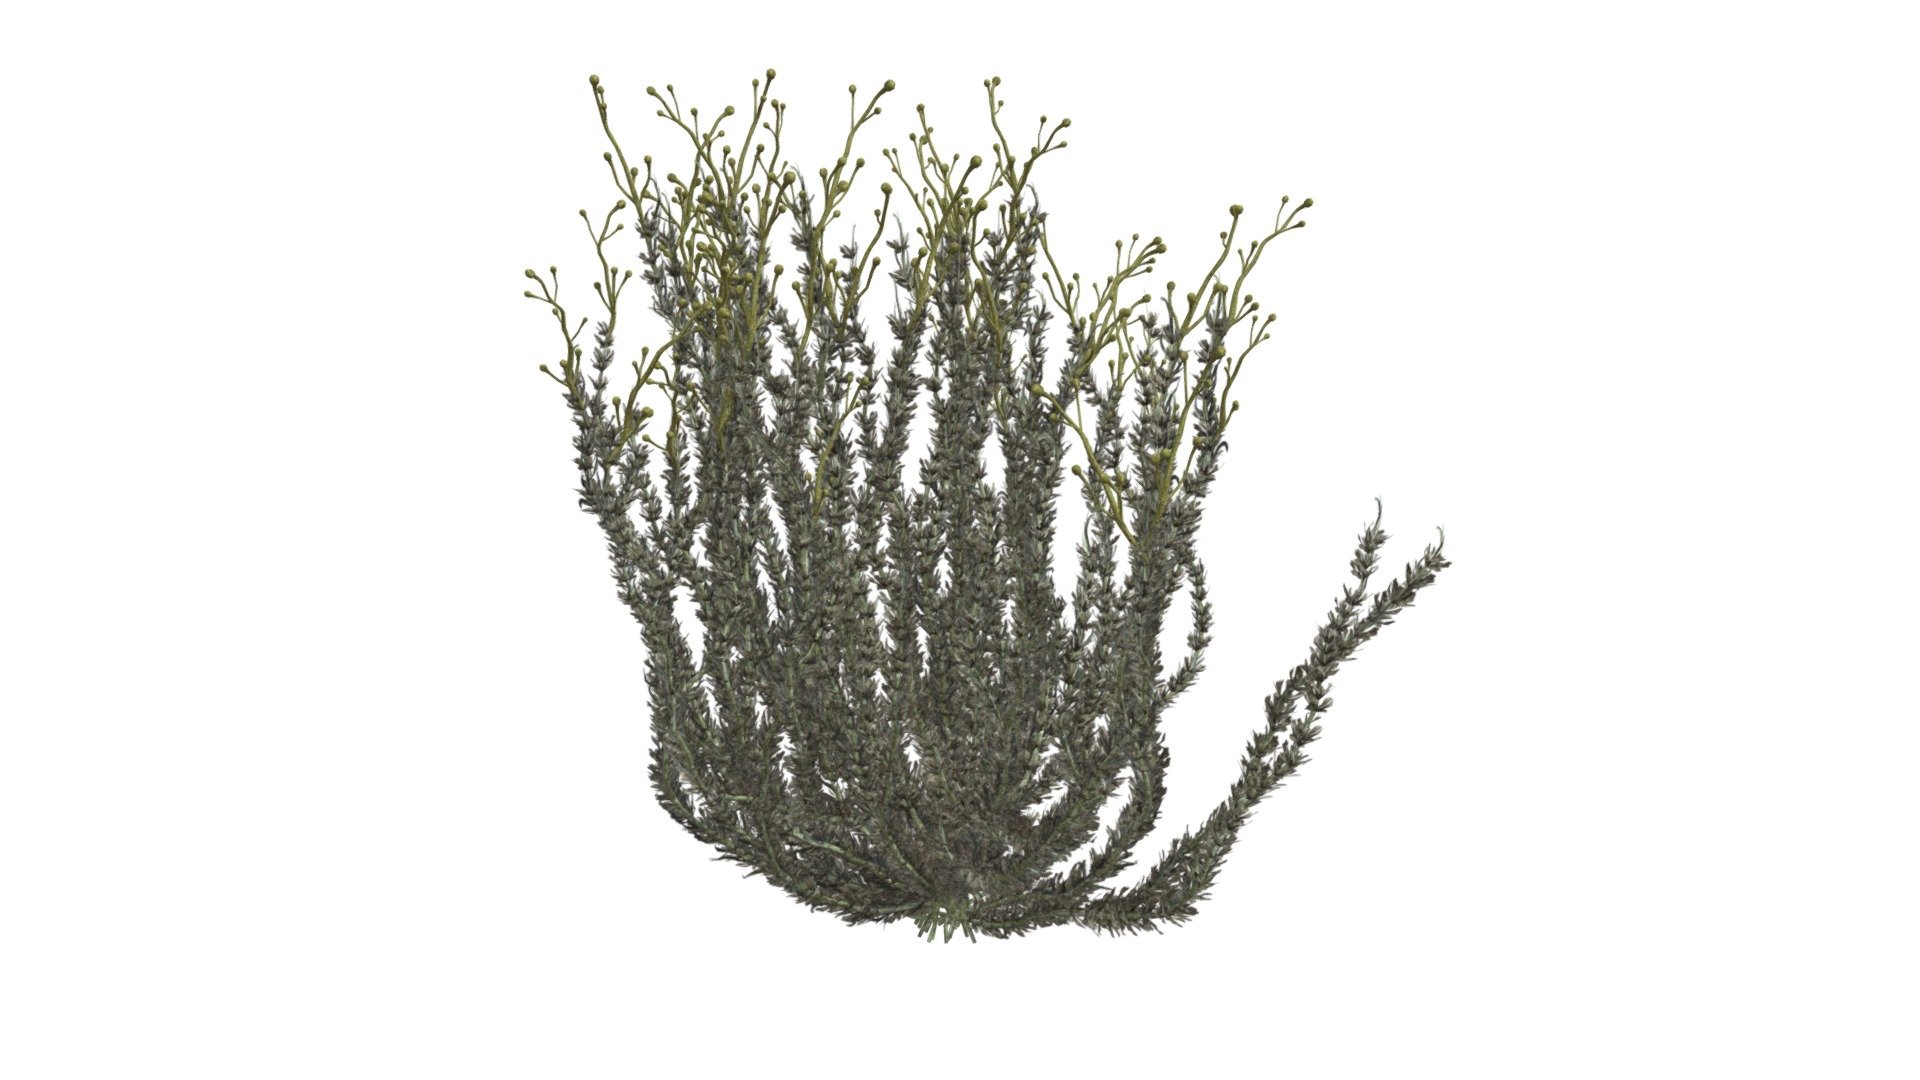 This 3D model of the Sagebrush Bush is a highly detailed and photorealistic option suitable for architectural, landscaping, and video game projects. The model is designed with carefully crafted textures that mimic the natural beauty of a real Sagebrush Bush. Its versatility allows it to bring a touch of realism to any project, whether it’s a small architectural rendering or a large-scale landscape design. Additionally, the model is optimized for performance and features efficient UV mapping. This photorealistic 3D model is the perfect solution for architects, landscapers, and game developers who want to enhance the visual experience of their project with a highly detailed, photorealistic Sagebrush Bush 3d model